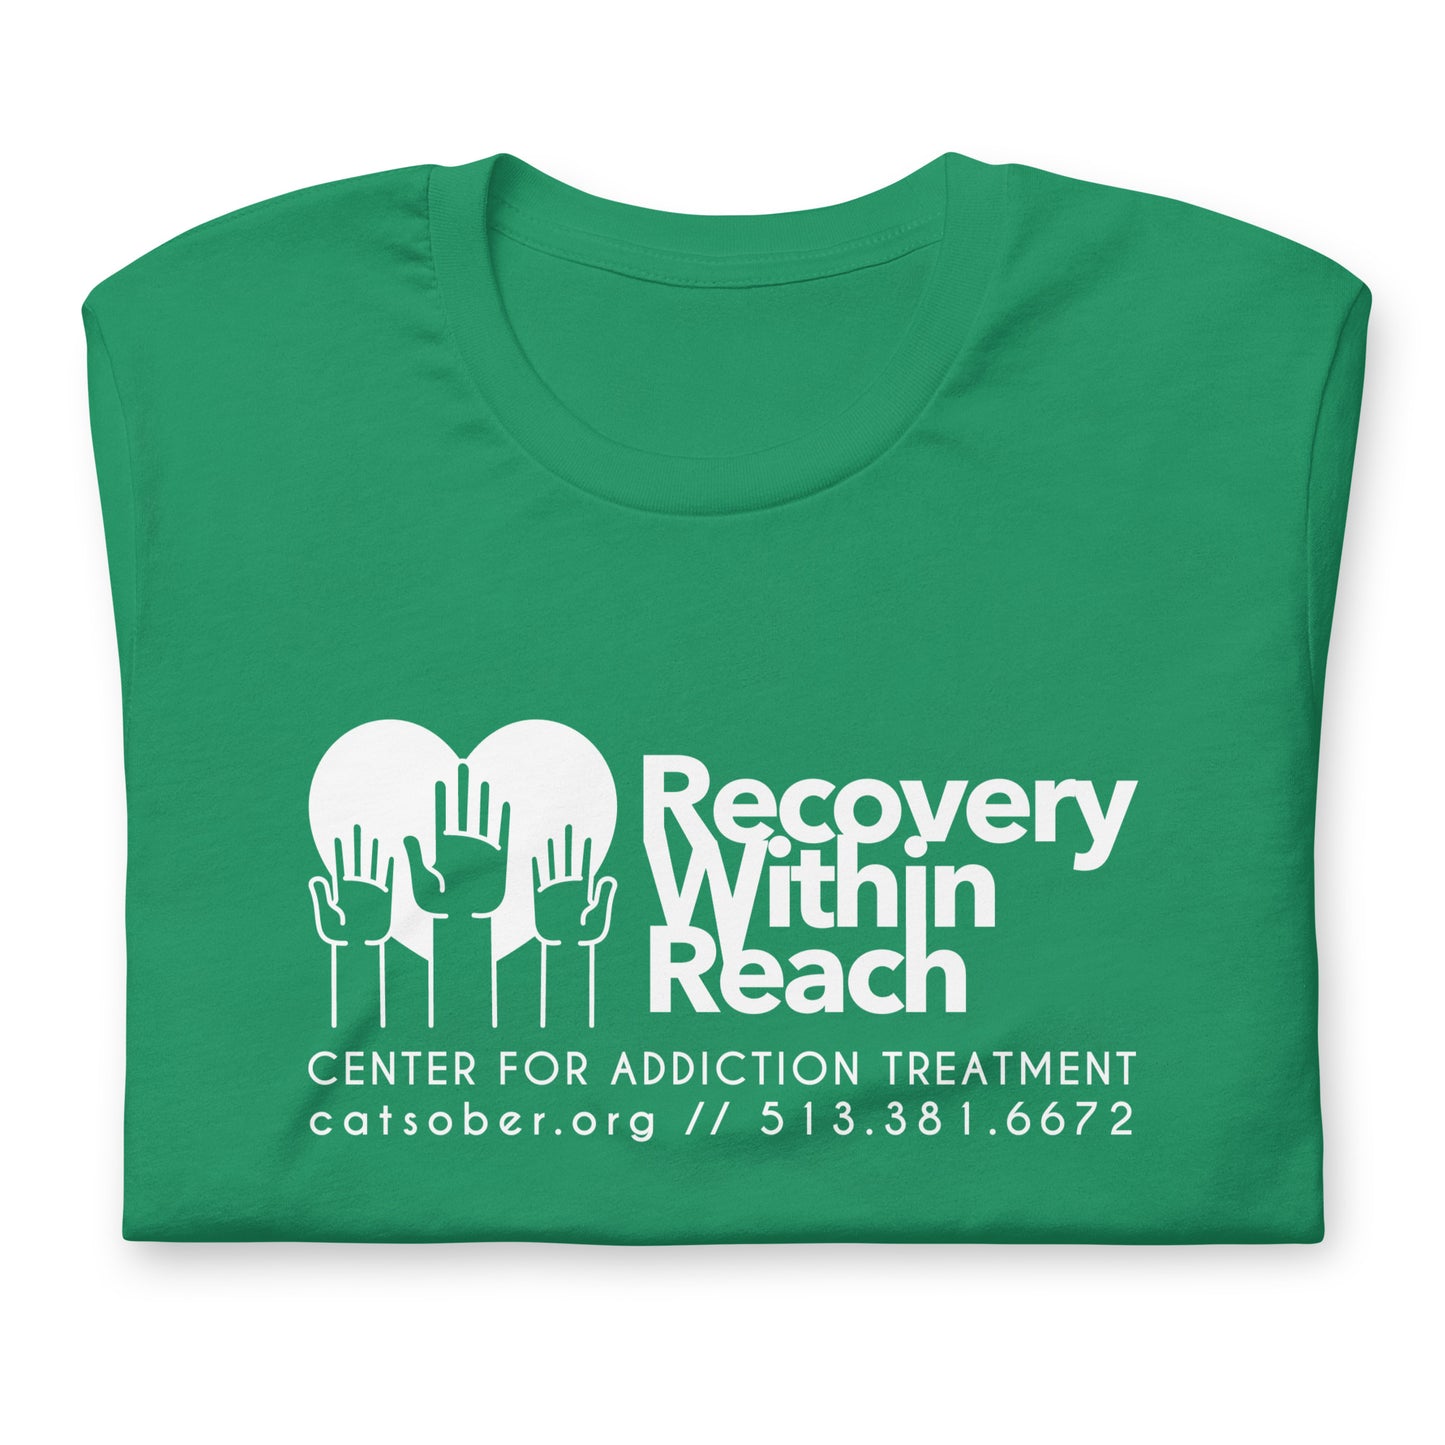 Recovery Within Reach Tee (Light Text Version)